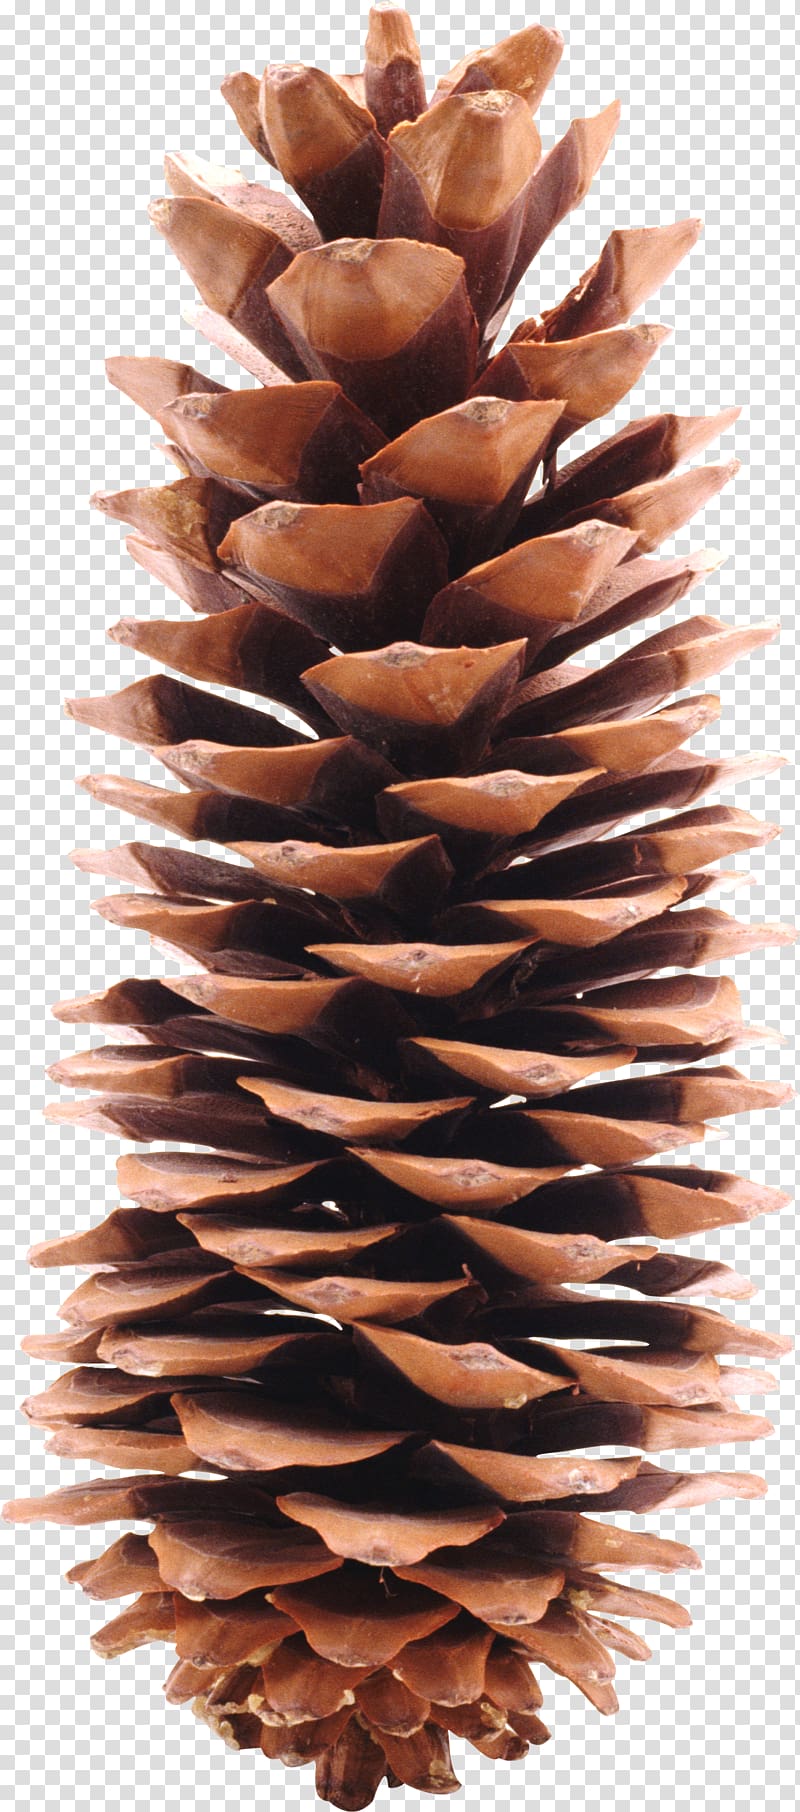 Pine cone transparent background PNG clipart